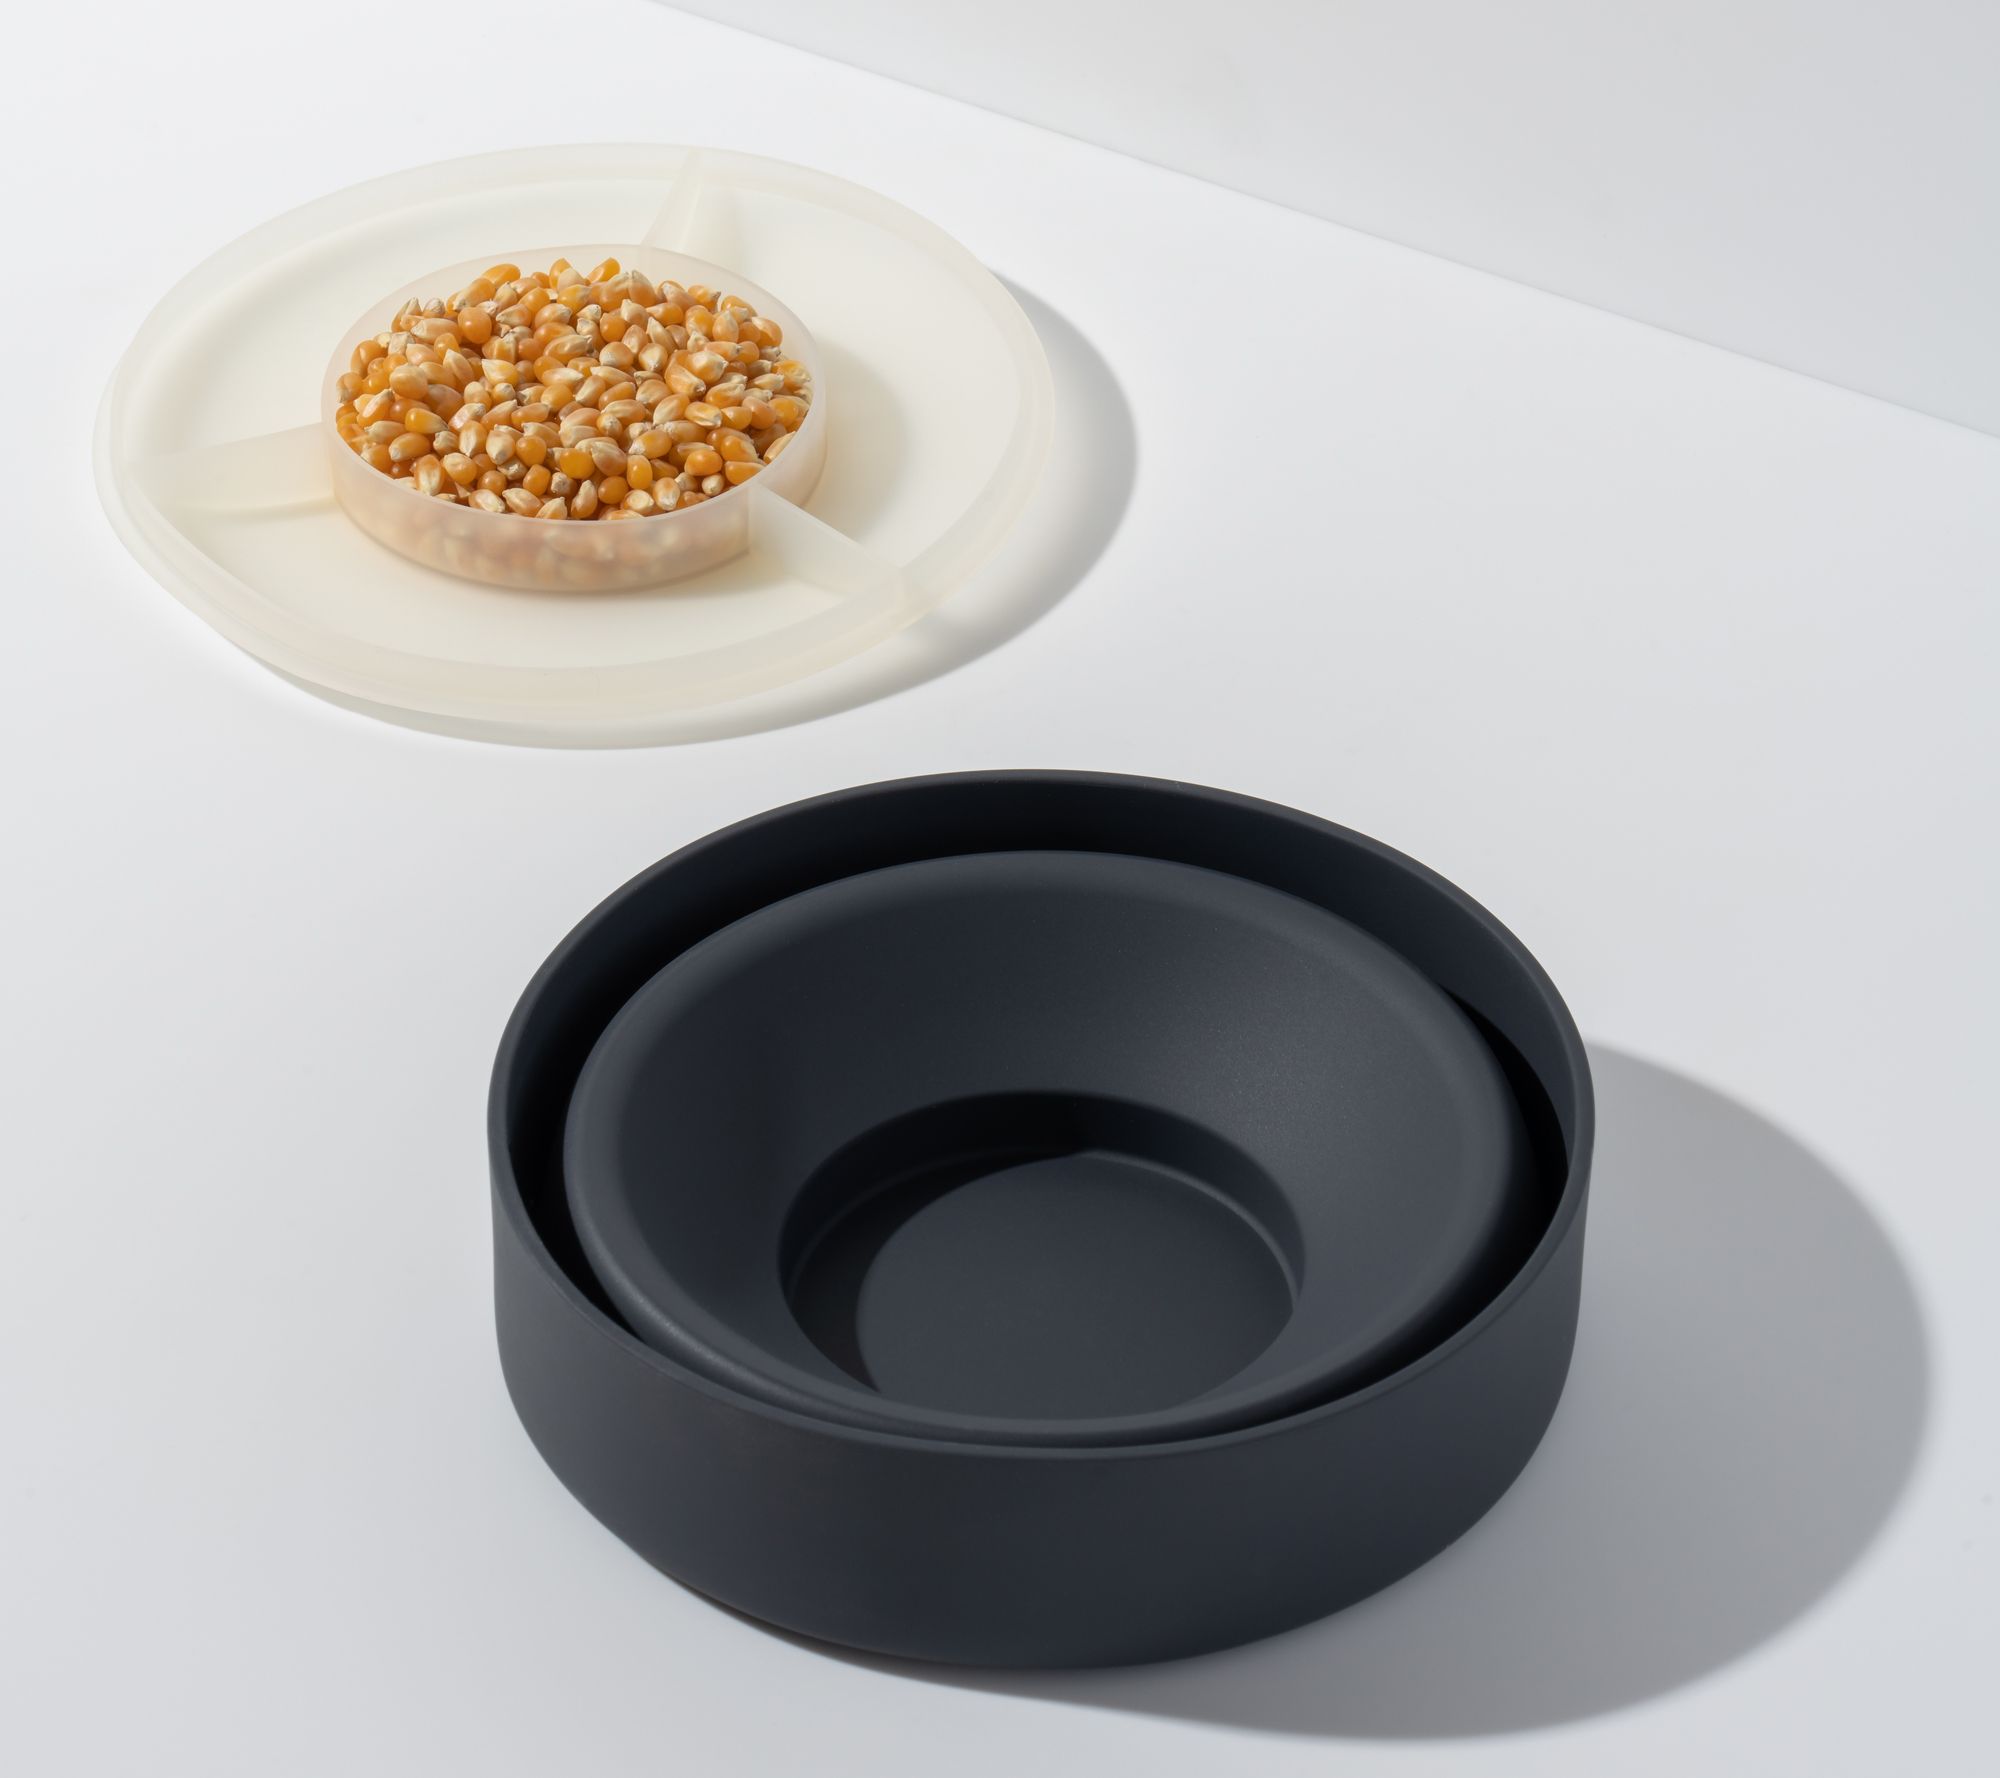 W&P Microwave Silicone Popper Maker | Black | Collapsible Bowl w/Built in  Measuring, BPA, Eco-Friendly, Waste Free, 9.3 Cups of Popped Popcorn